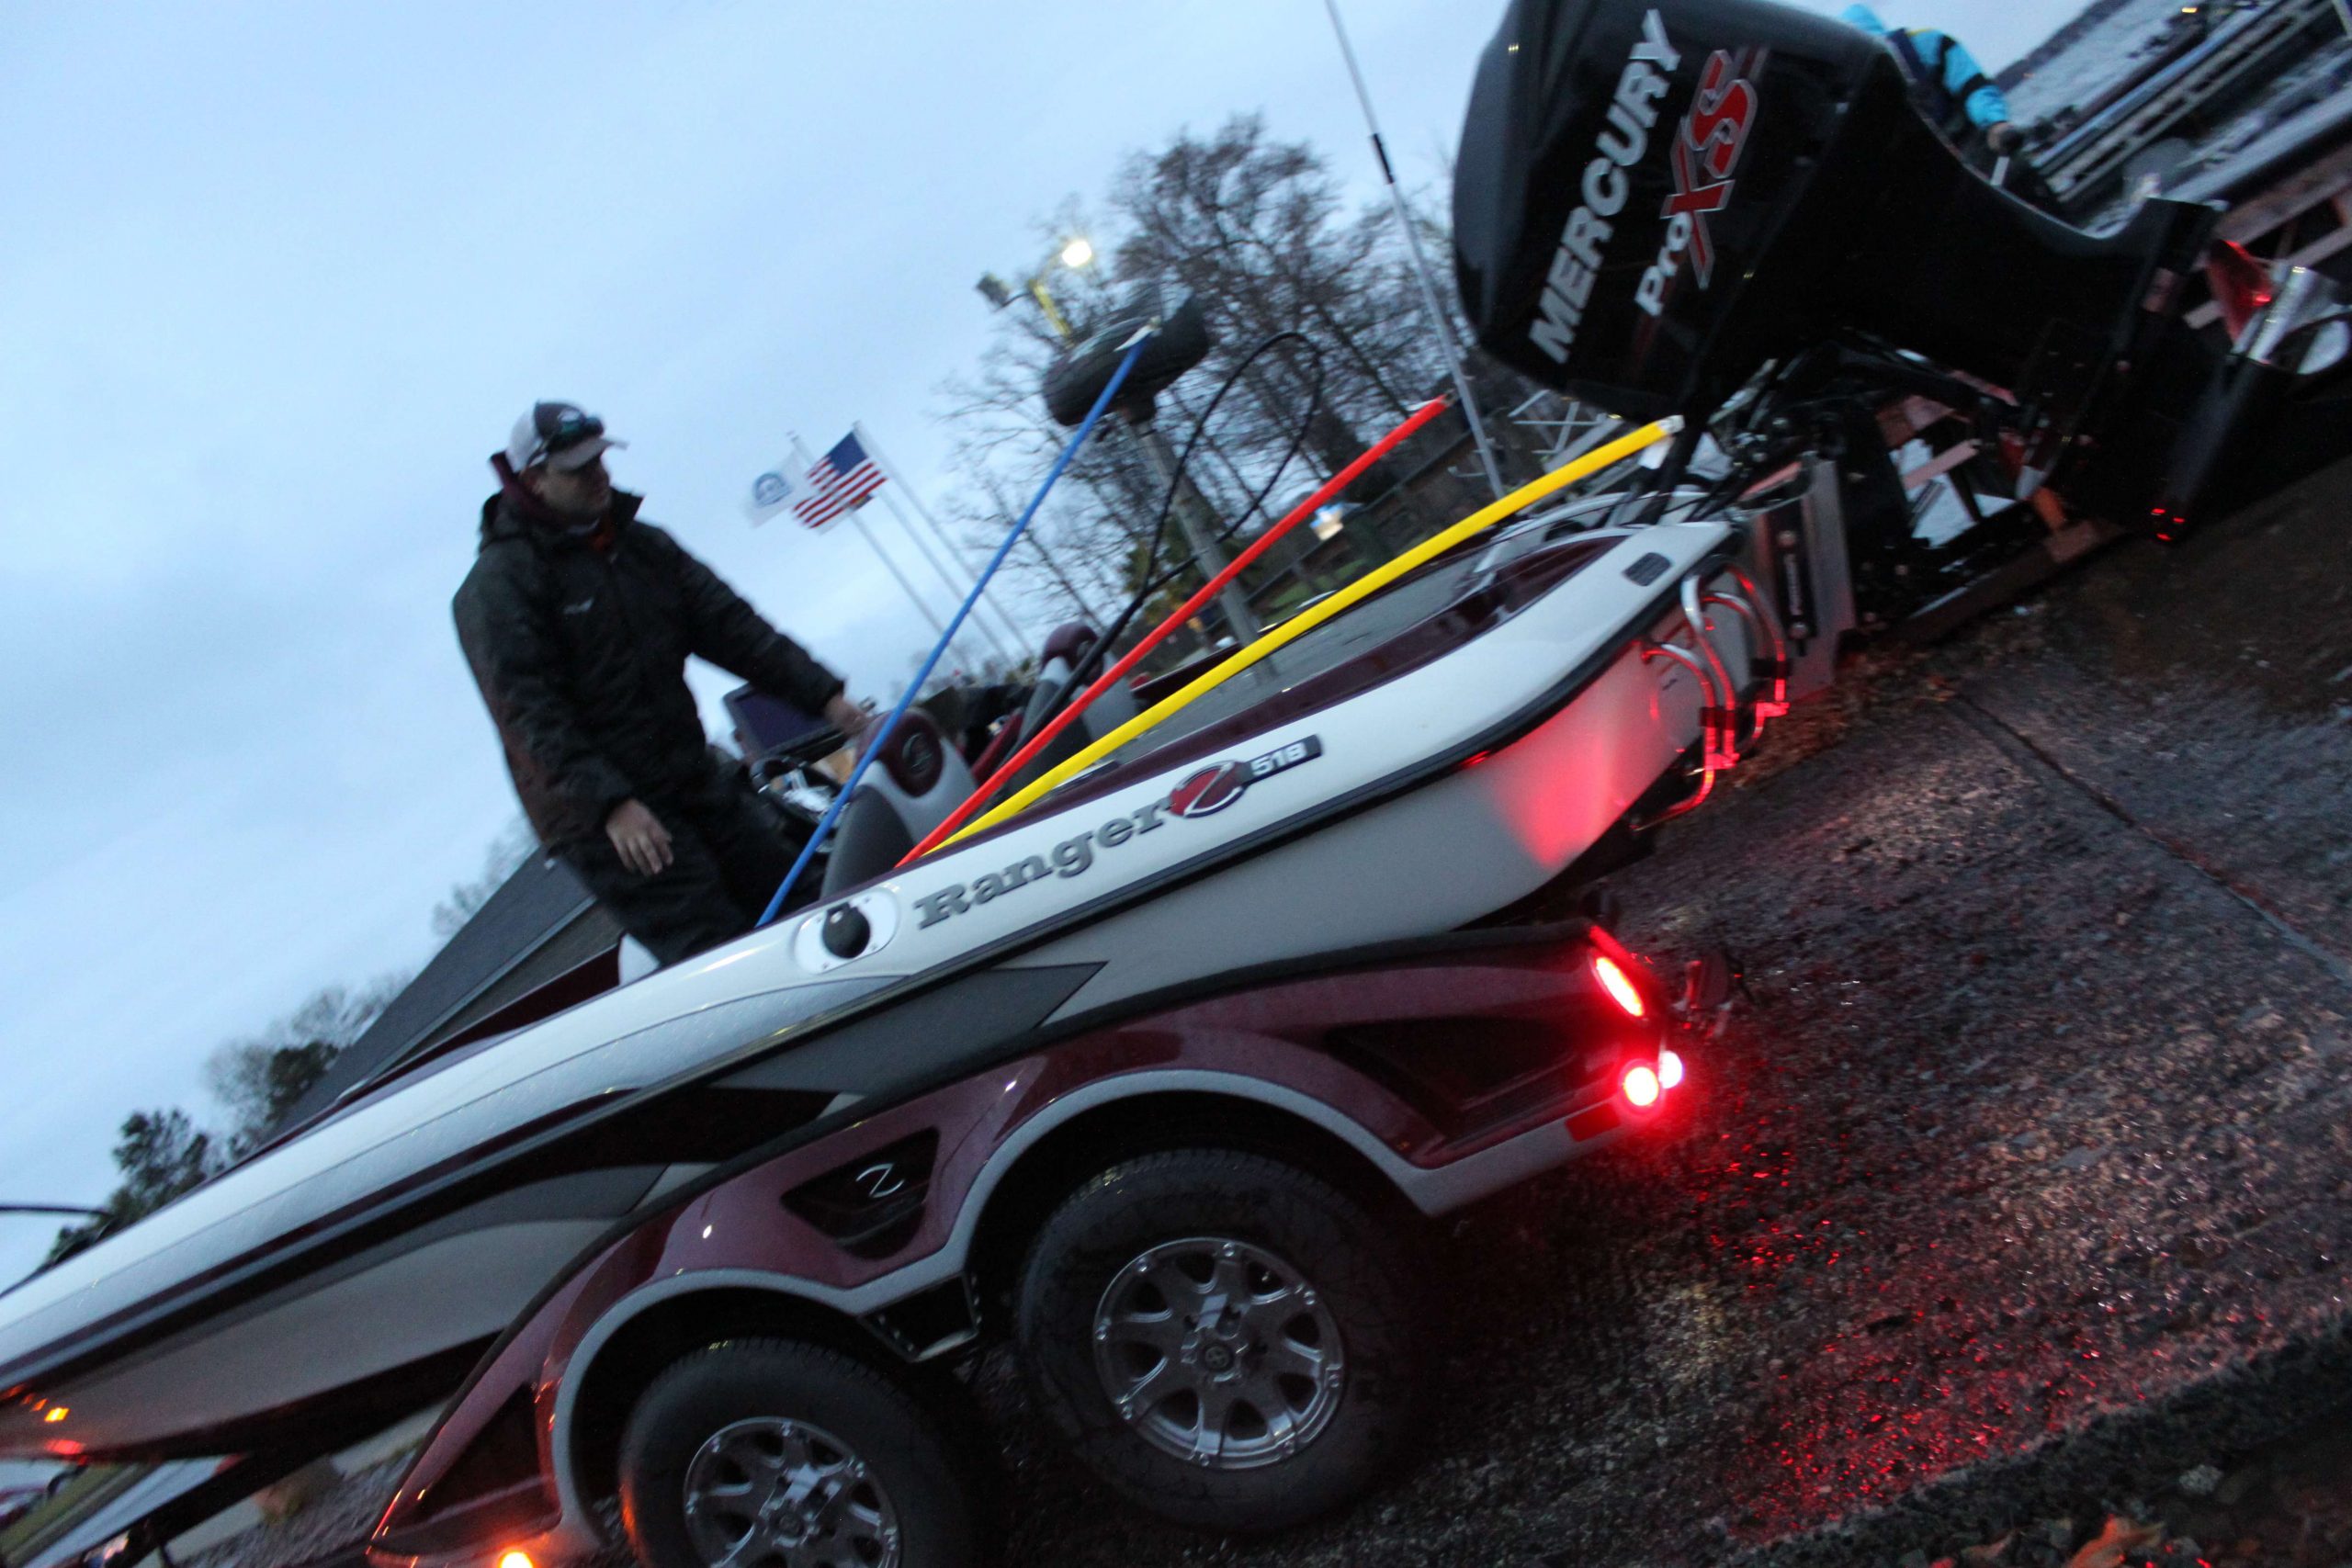 More boats arrive and get ready for a chilly, wet day of fishing.